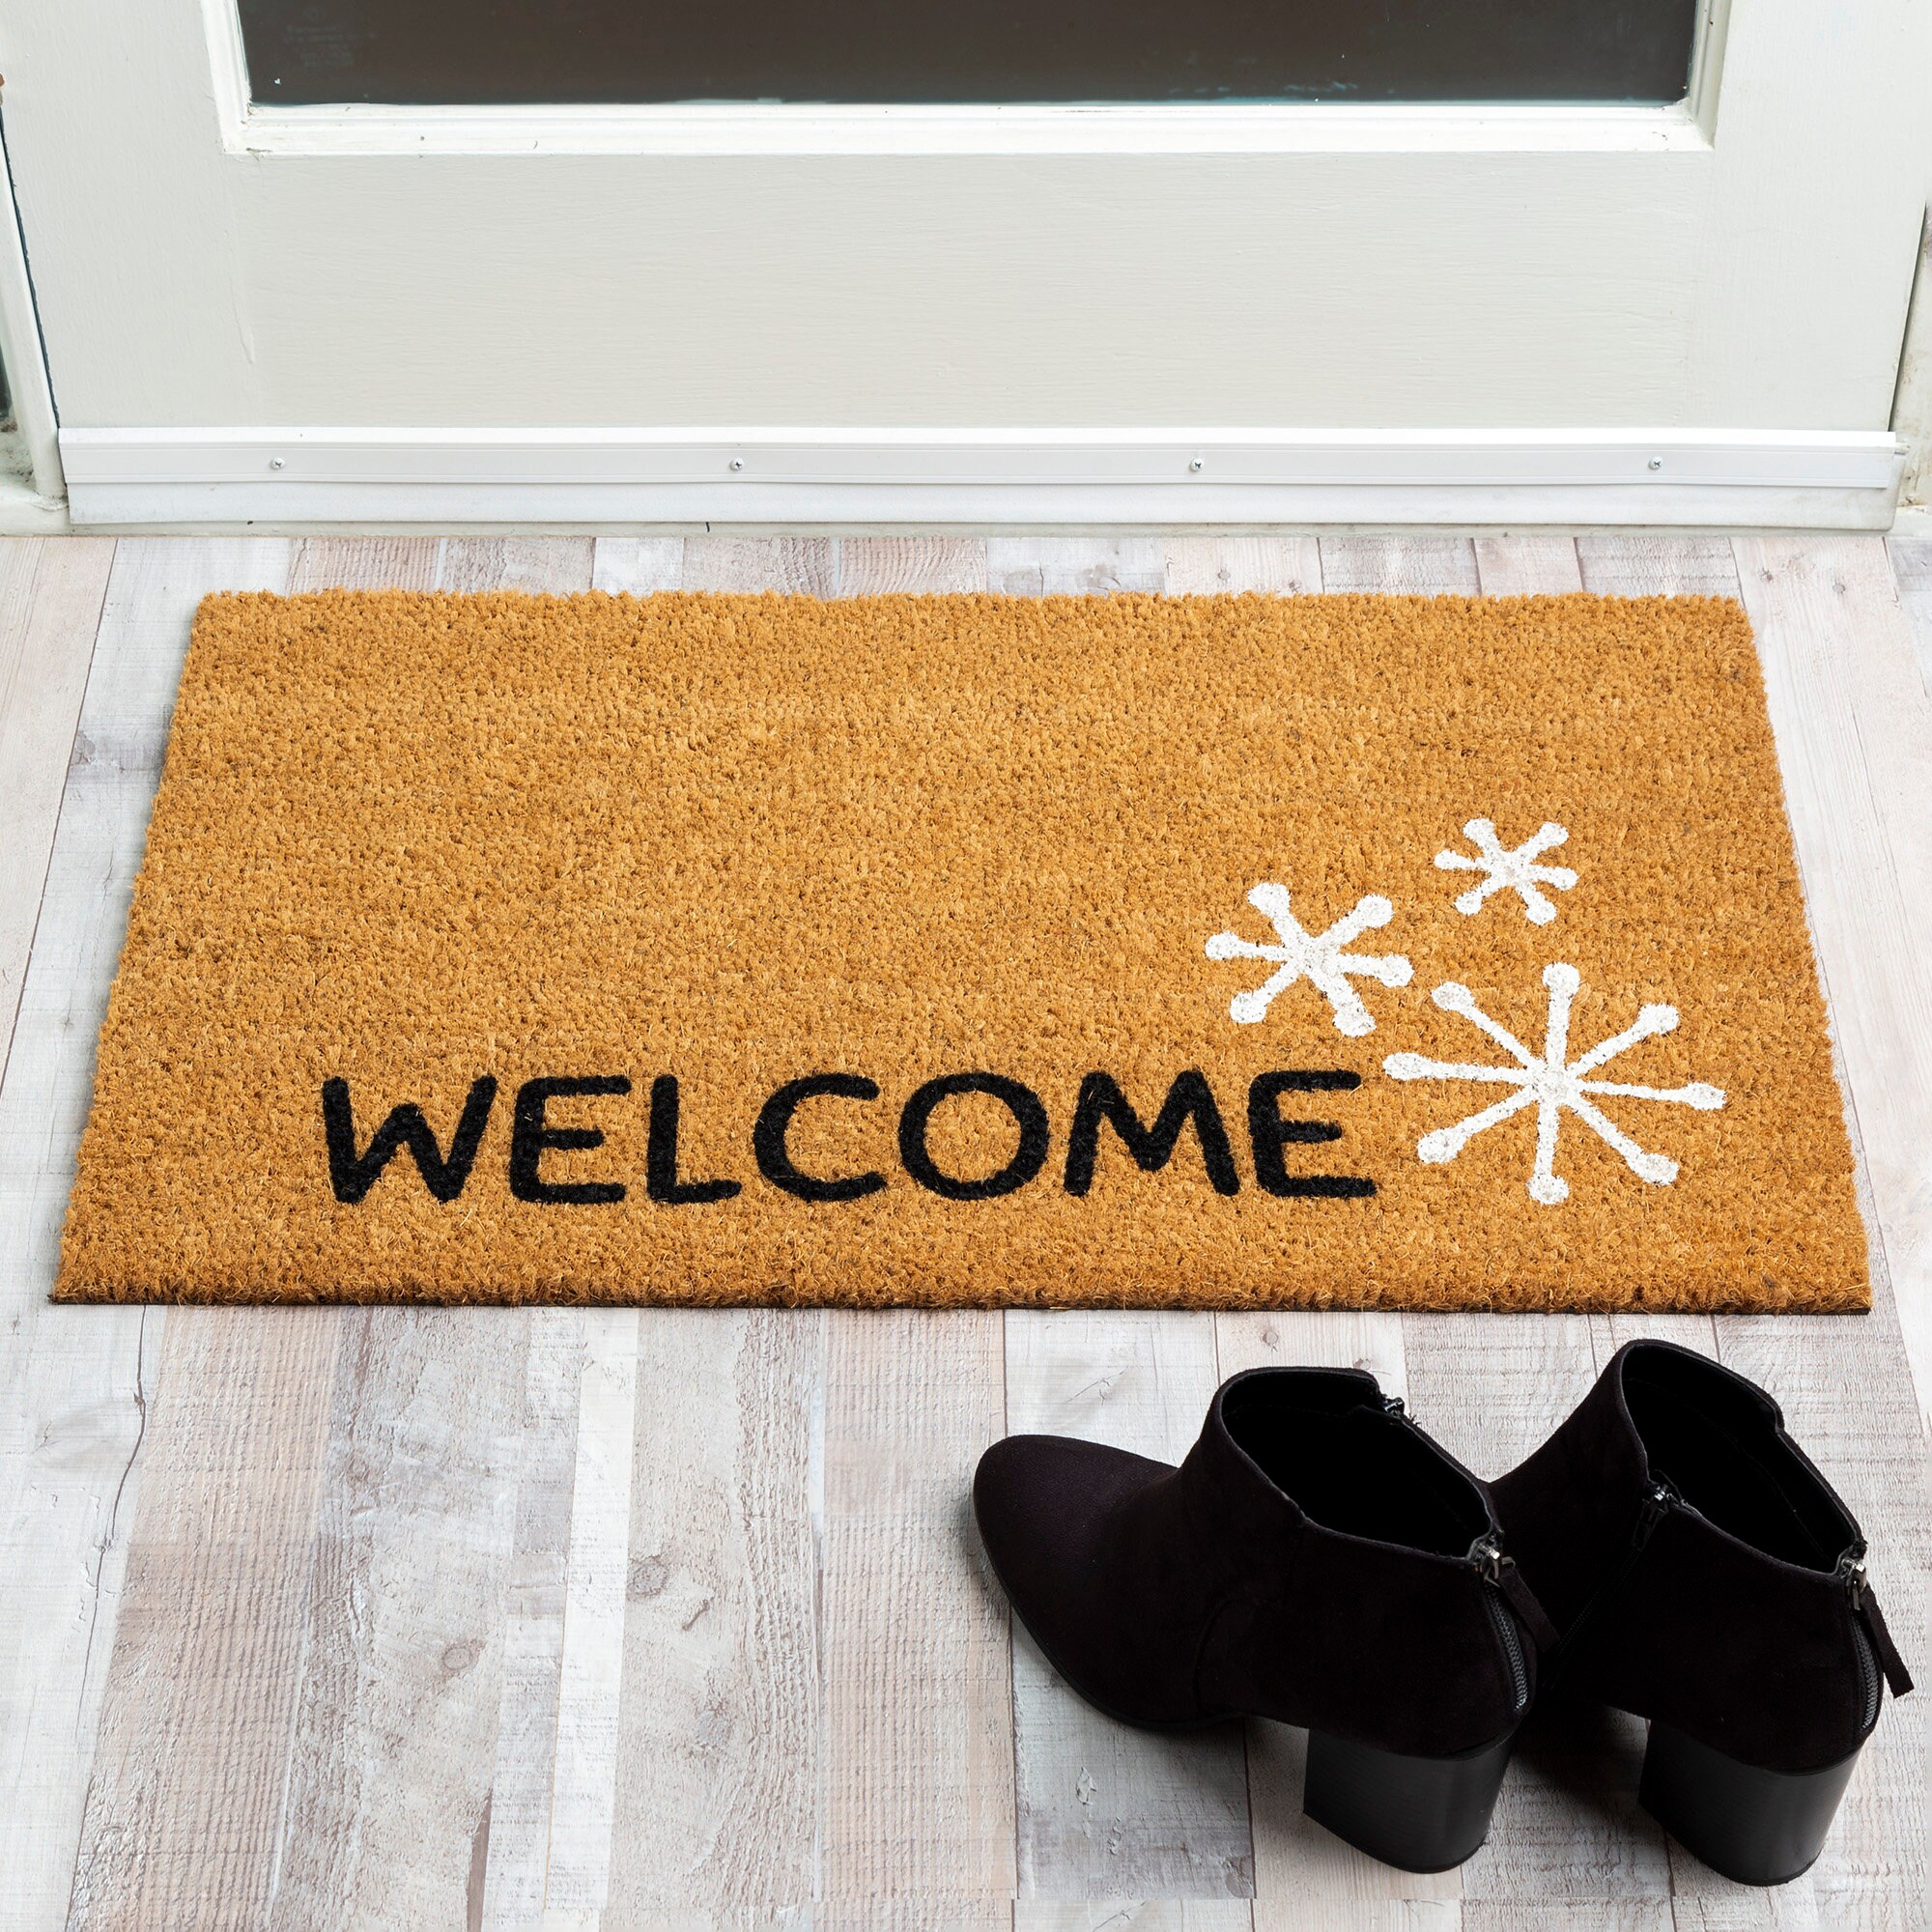 EwdeWwo Christmas Winter Indoor Doormat Welcome Door Mat 18 x 30,  Snowflake and Holly Berries Retro Style PVC Leather Mat Soft Non-Slip  Rubber